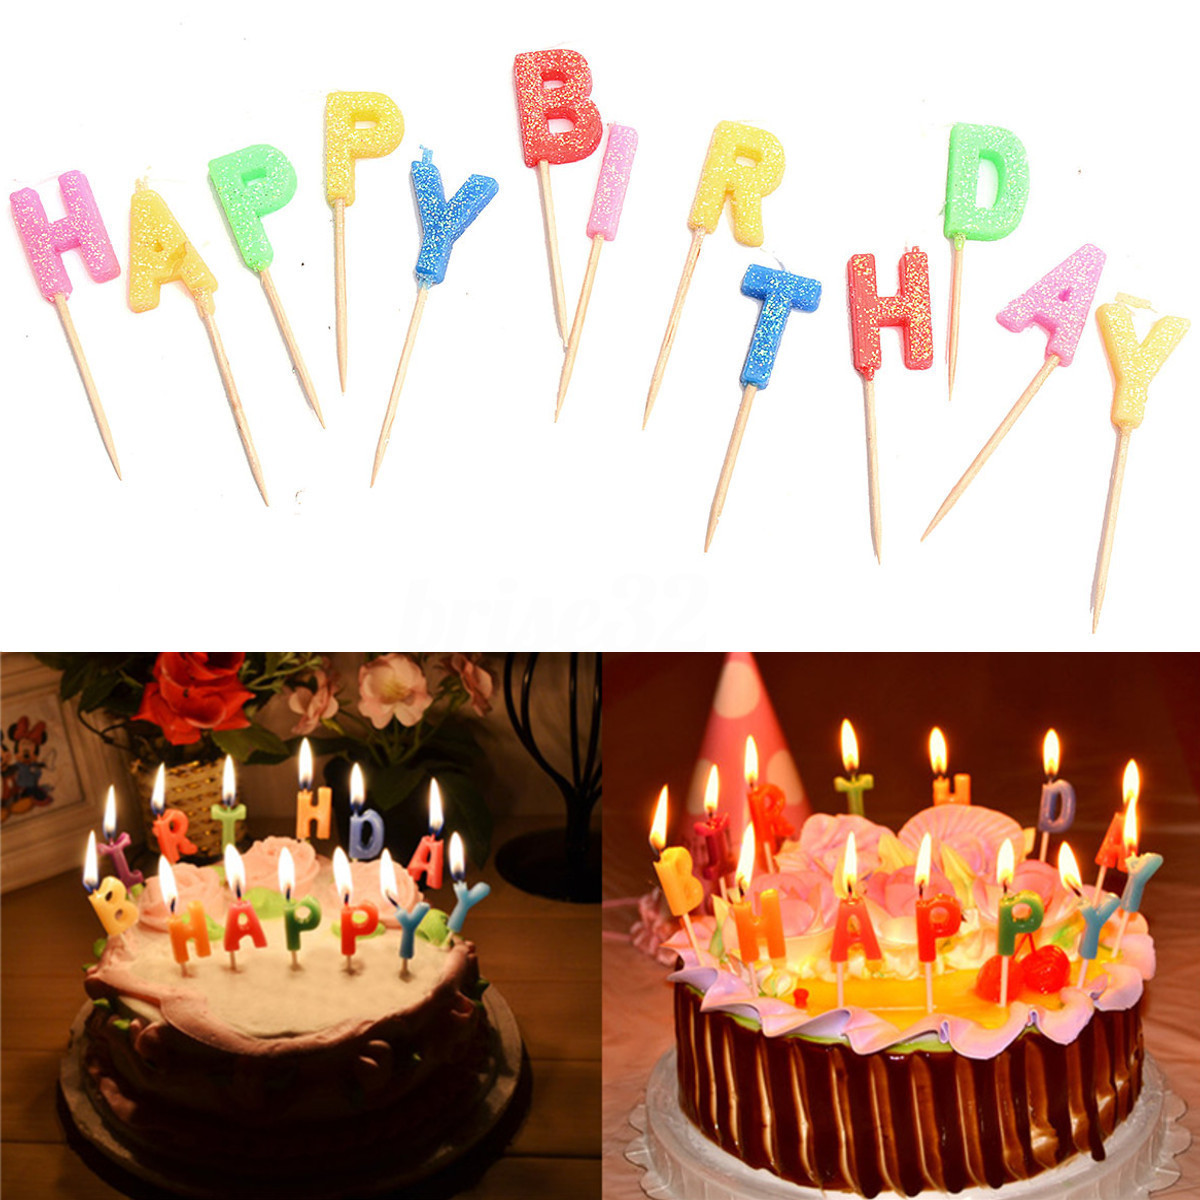 Happy Birthday Decorations
 Colorful Glitter Happy Birthday Letters Toothpick Cake